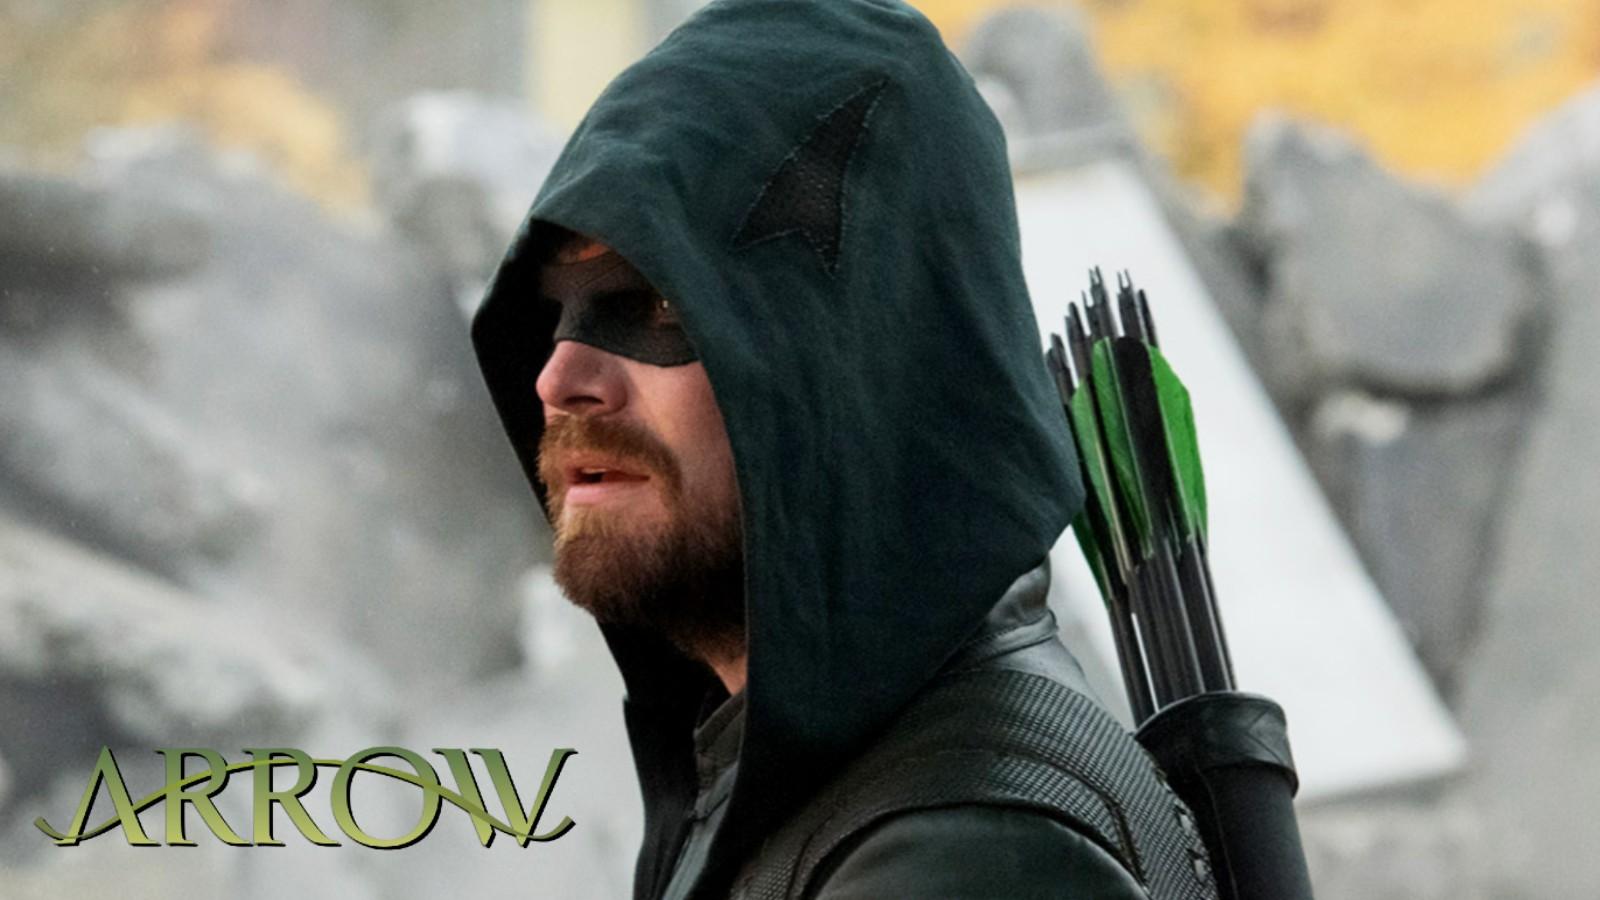 Stephen Amell in The CW's Arrow